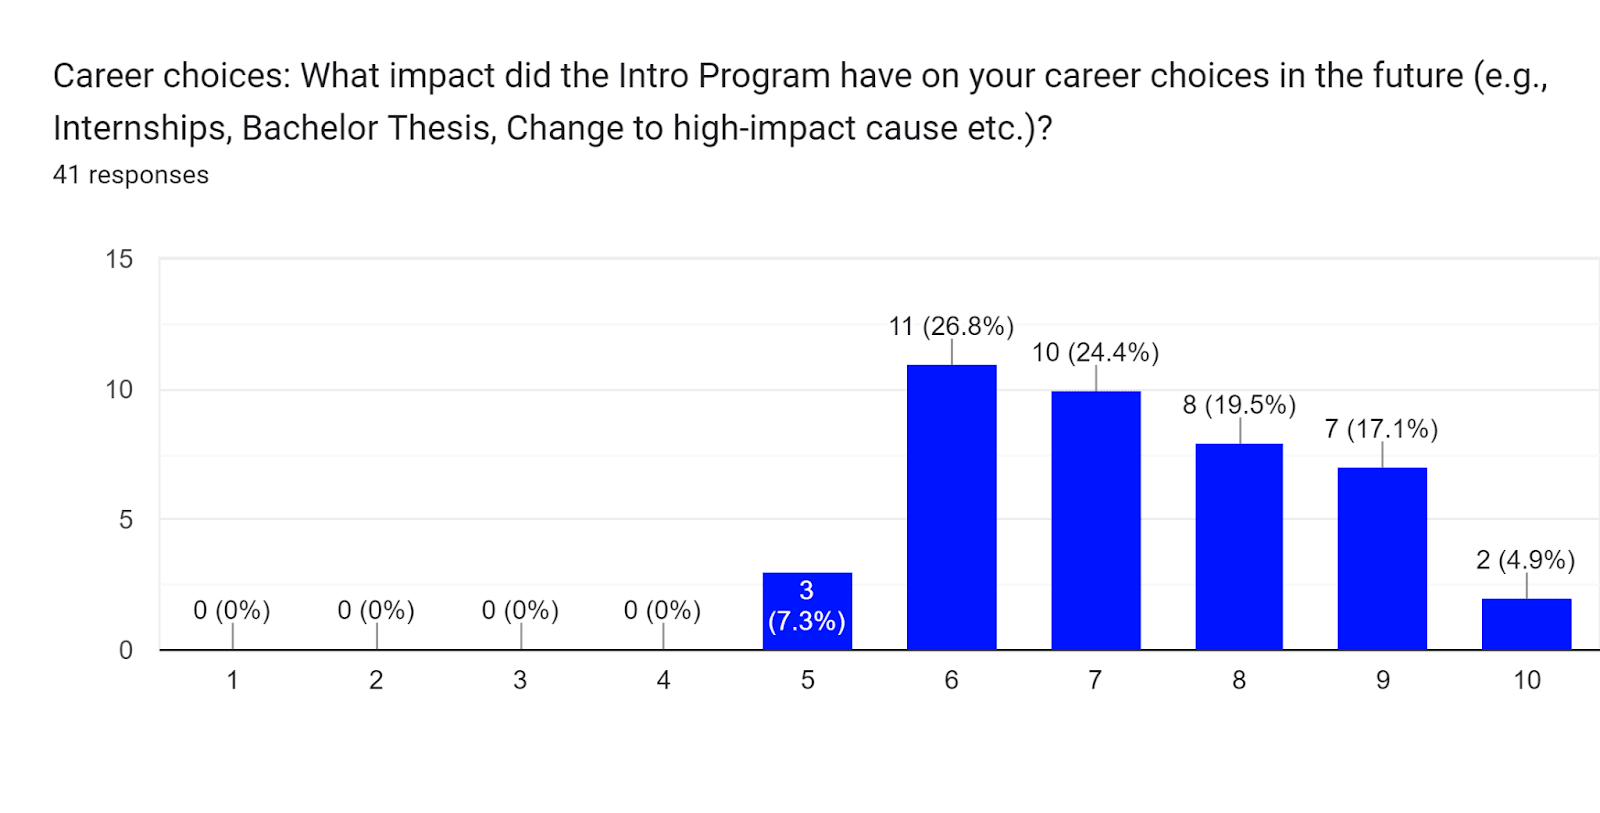 Forms response chart. Question title: Career choices: What impact did the Intro Program have on your career choices in the future (e.g., Internships, Bachelor Thesis, Change to high-impact cause etc.)?. Number of responses: 41 responses.